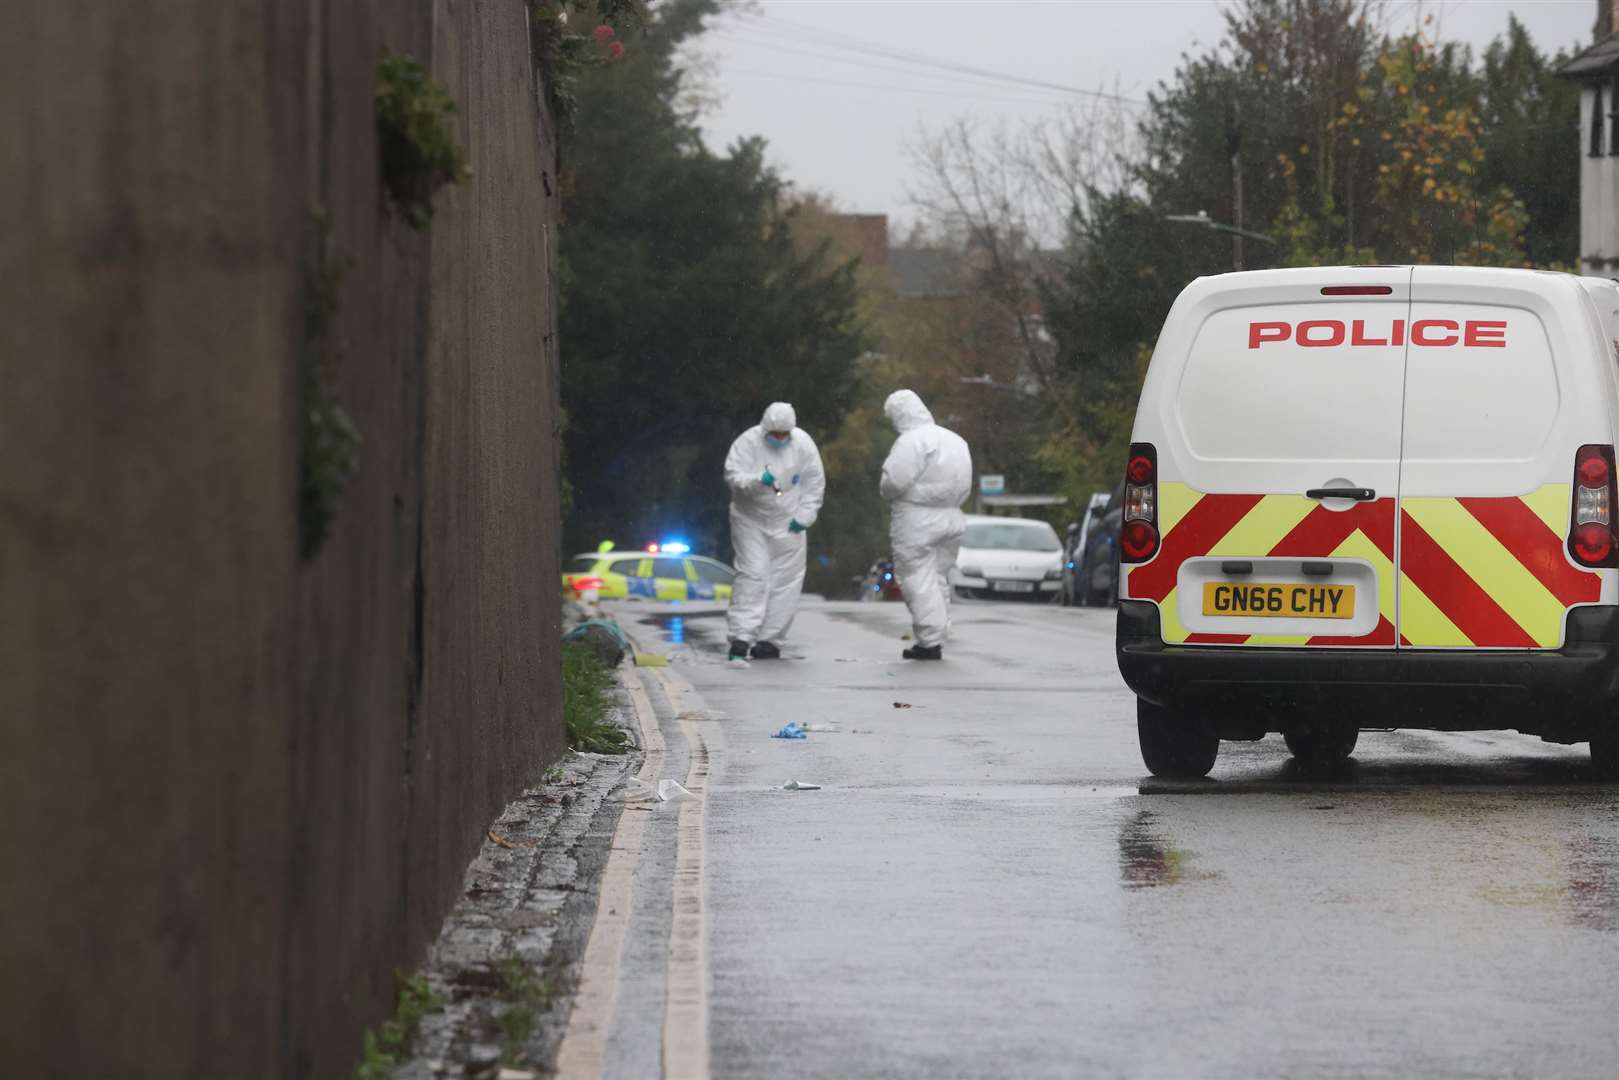 Forensic officers at the scene of a serious assault in Borstal Street, Borstal